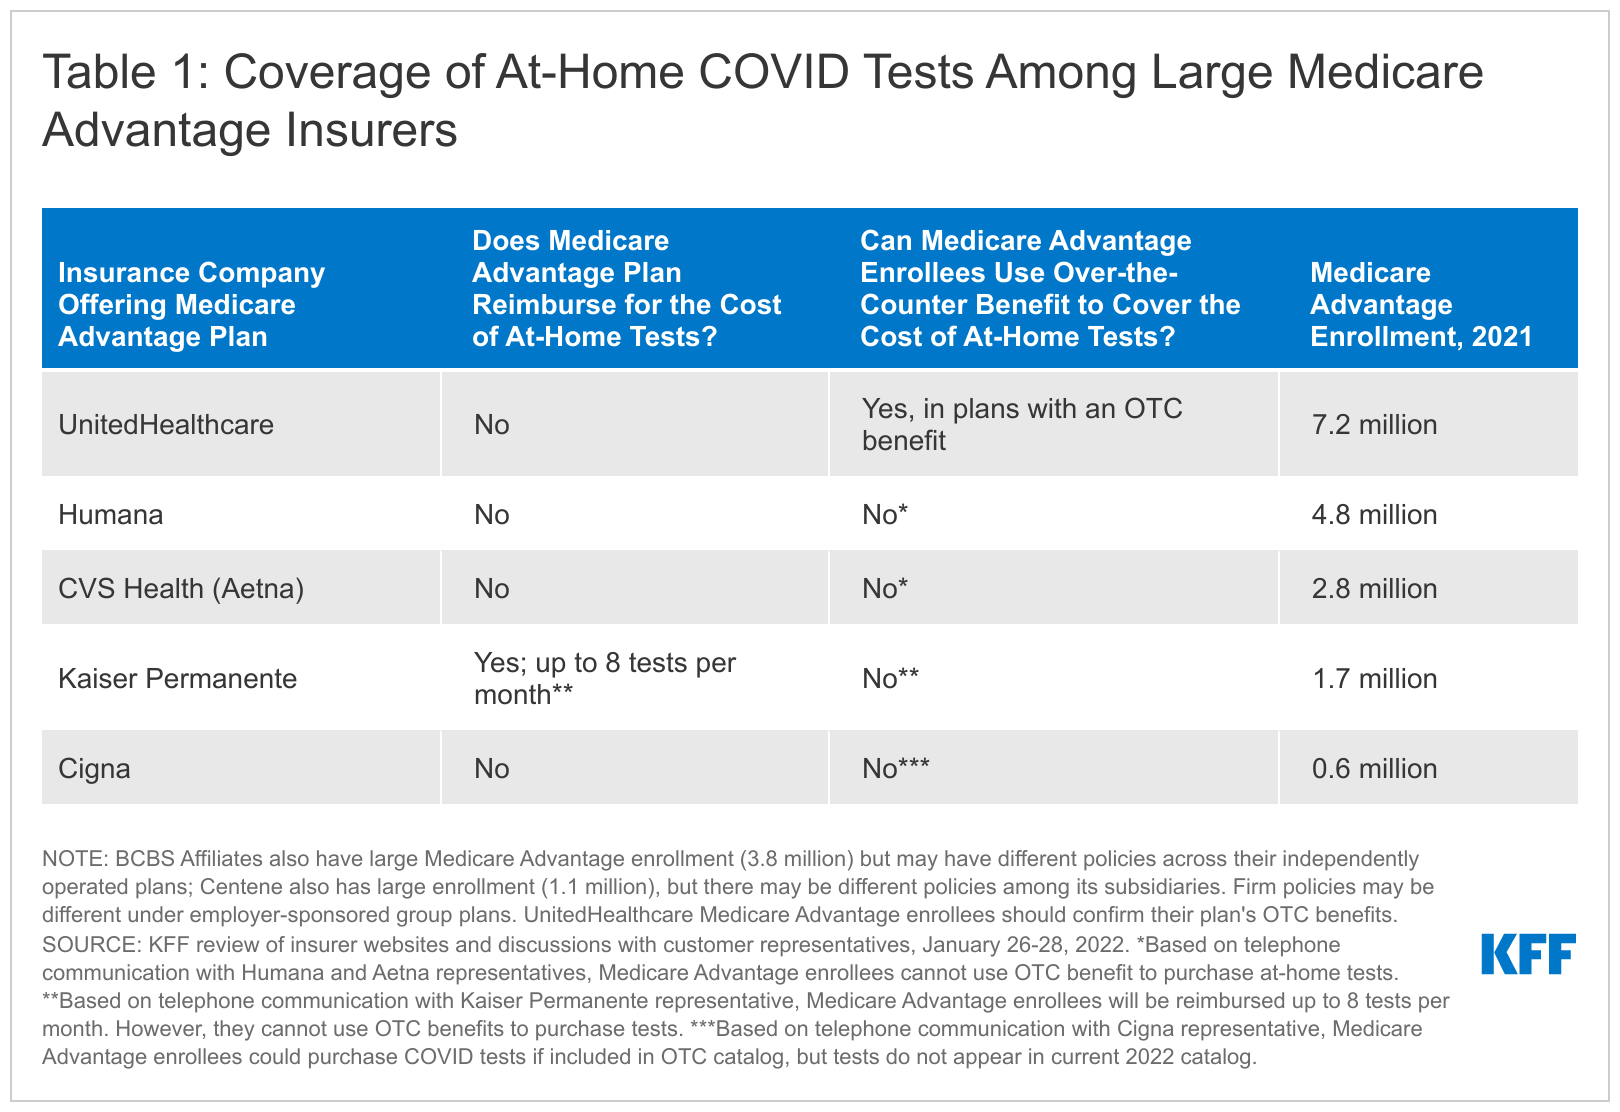 Are Medicare Advantage Insurers Covering the Cost of AtHome COVID19